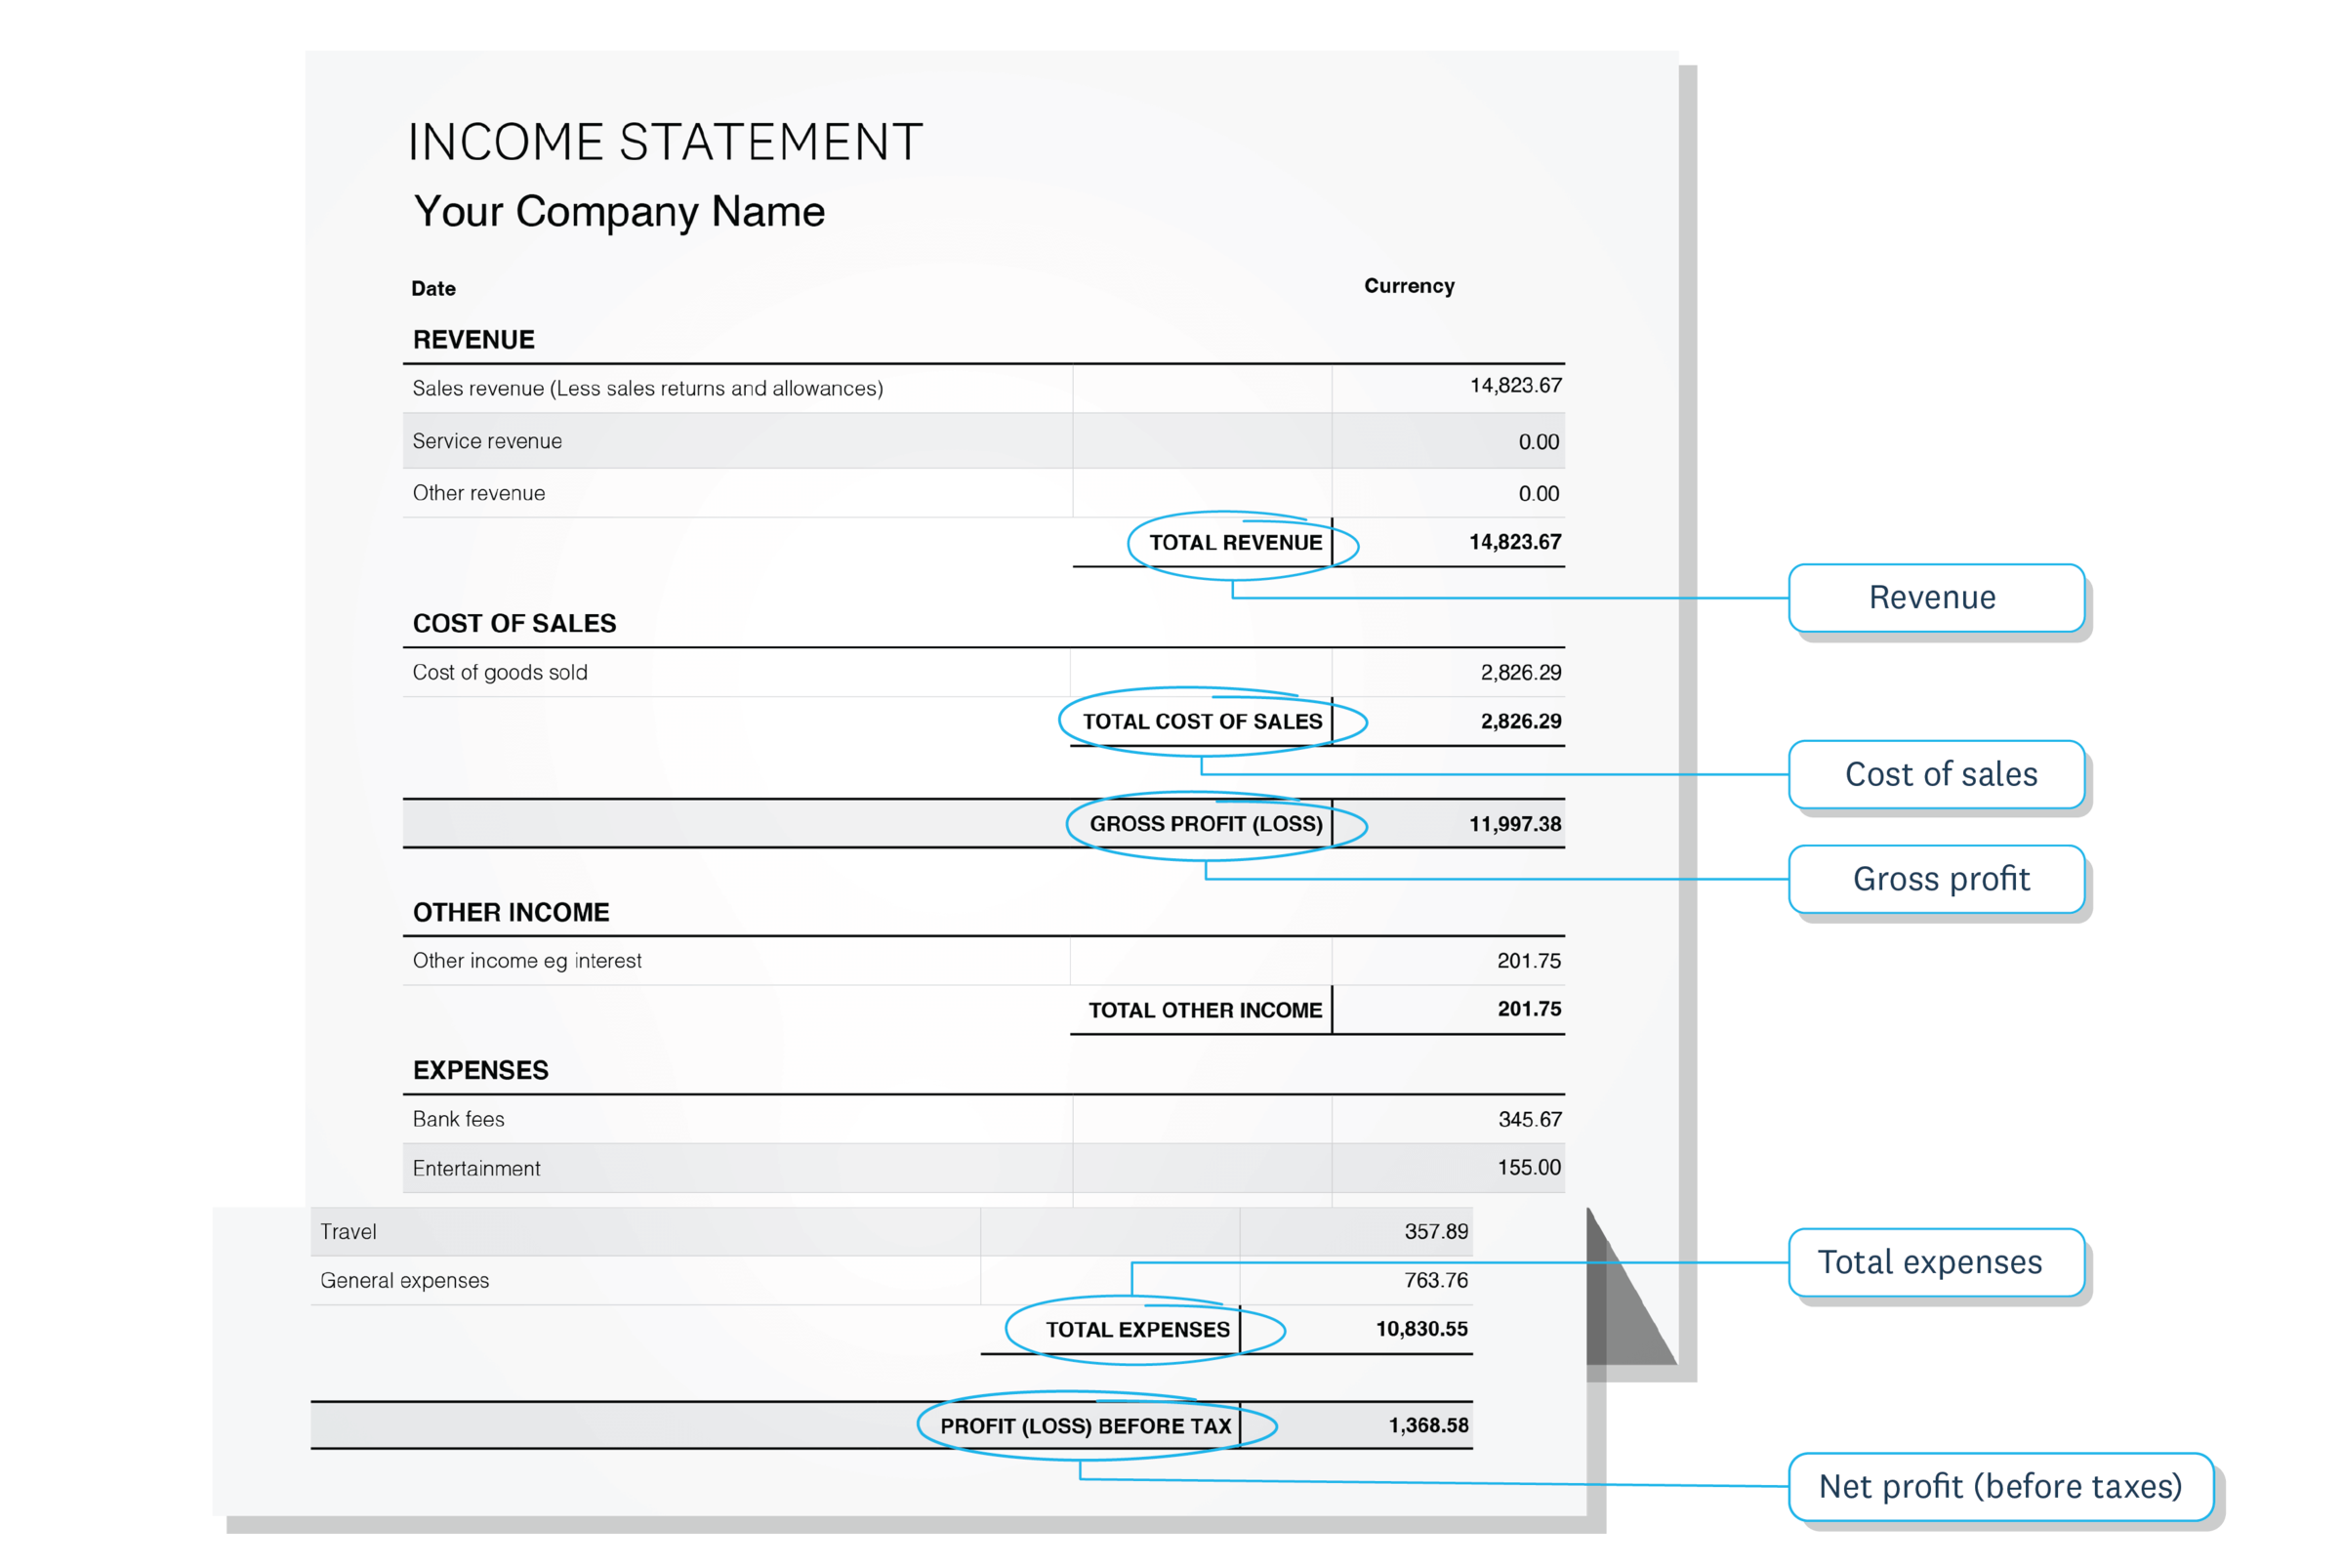 Sample income statement with sections for revenue, COS, gross profit, general expenses and net profit.